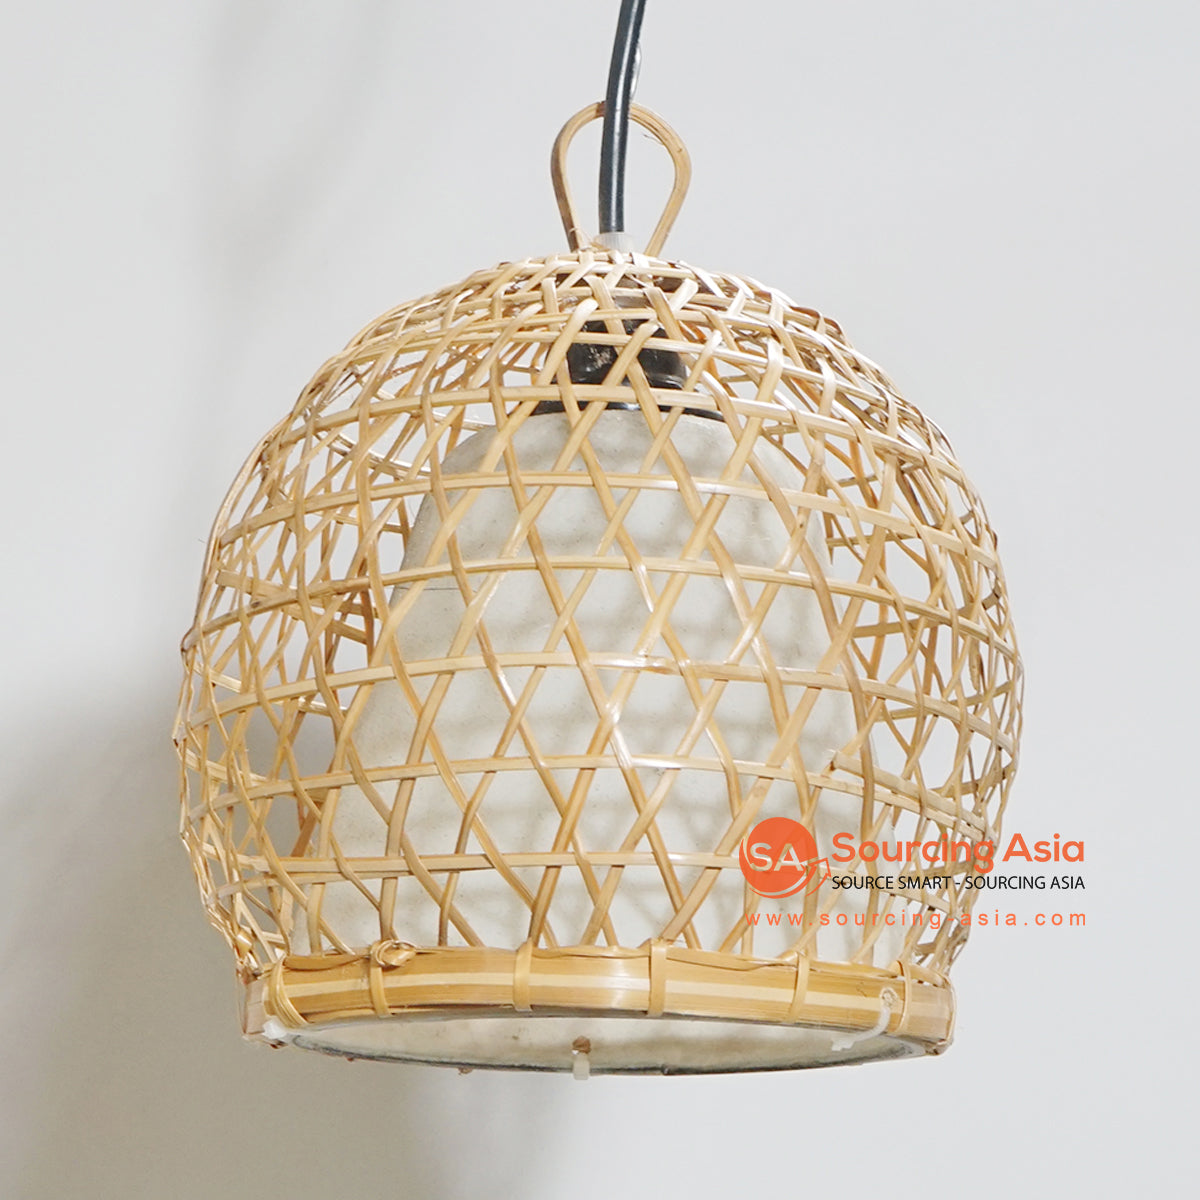 HBSC215 NATURAL BAMBOO WOOD CHICKEN CAGE PENDANT LAMP